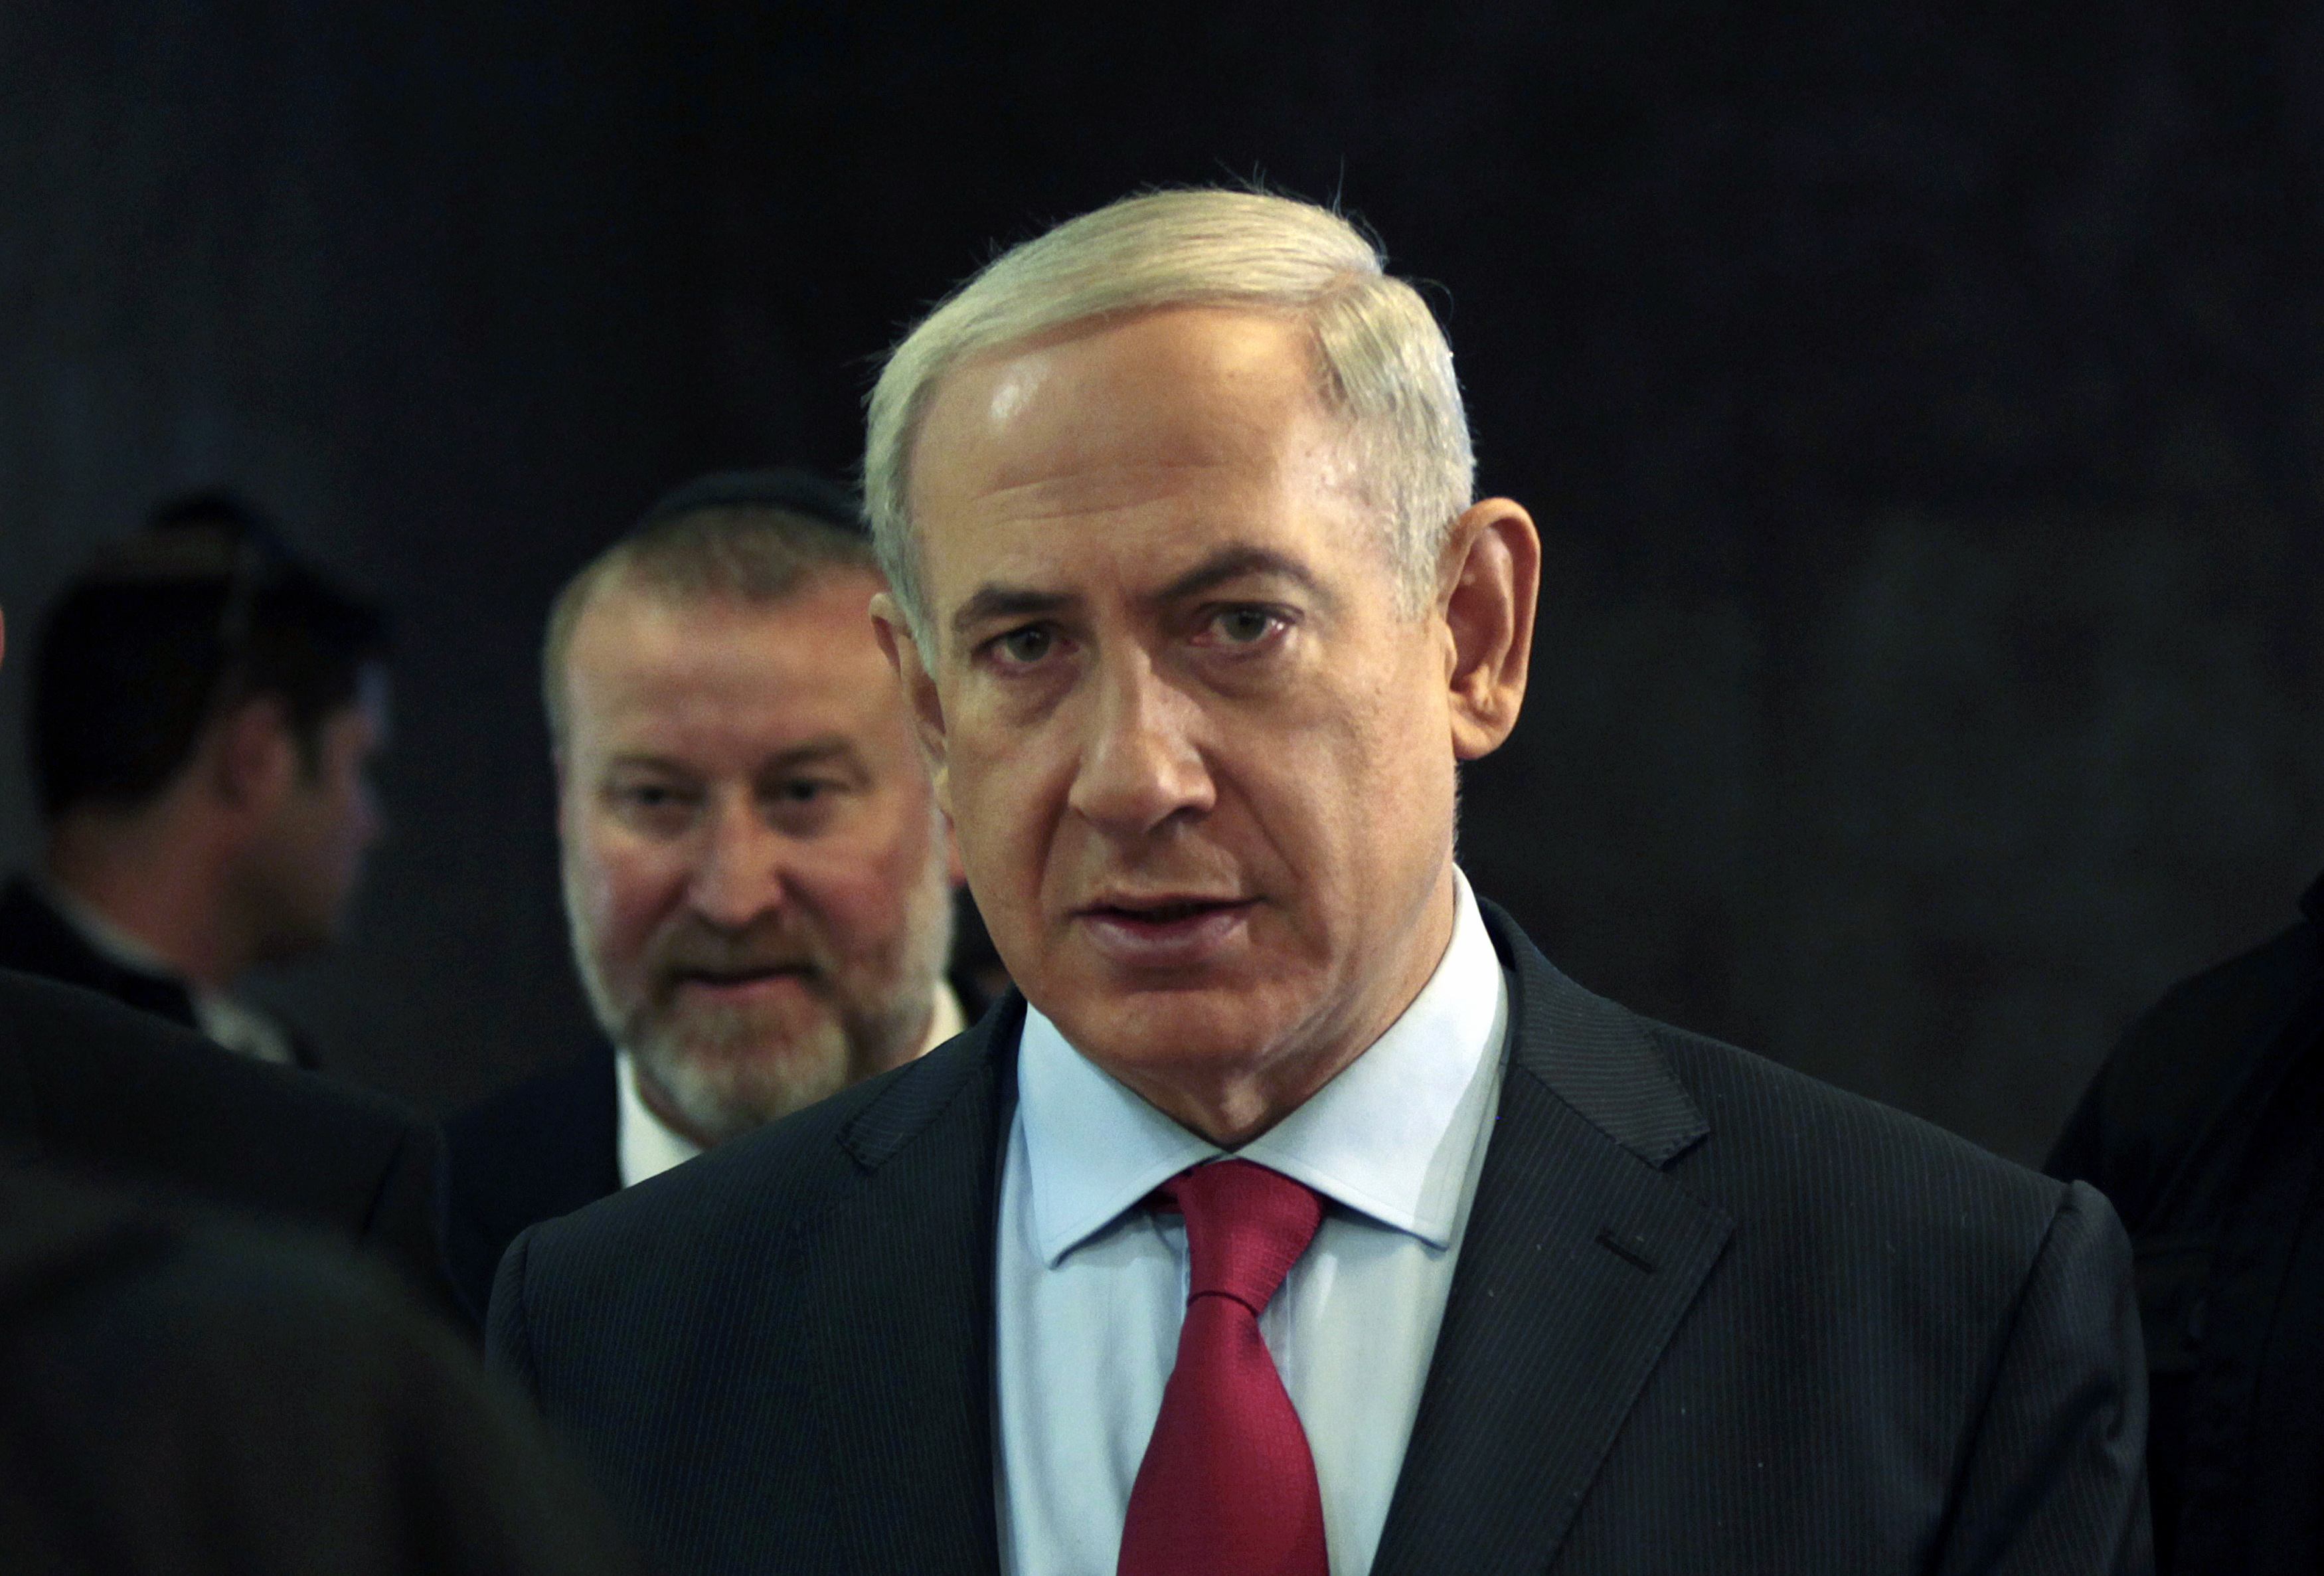 The arrest was announced just hours after Israel's Prime Minister Benjamin Netanyahu left for Washington and New York. Photo: Reuters